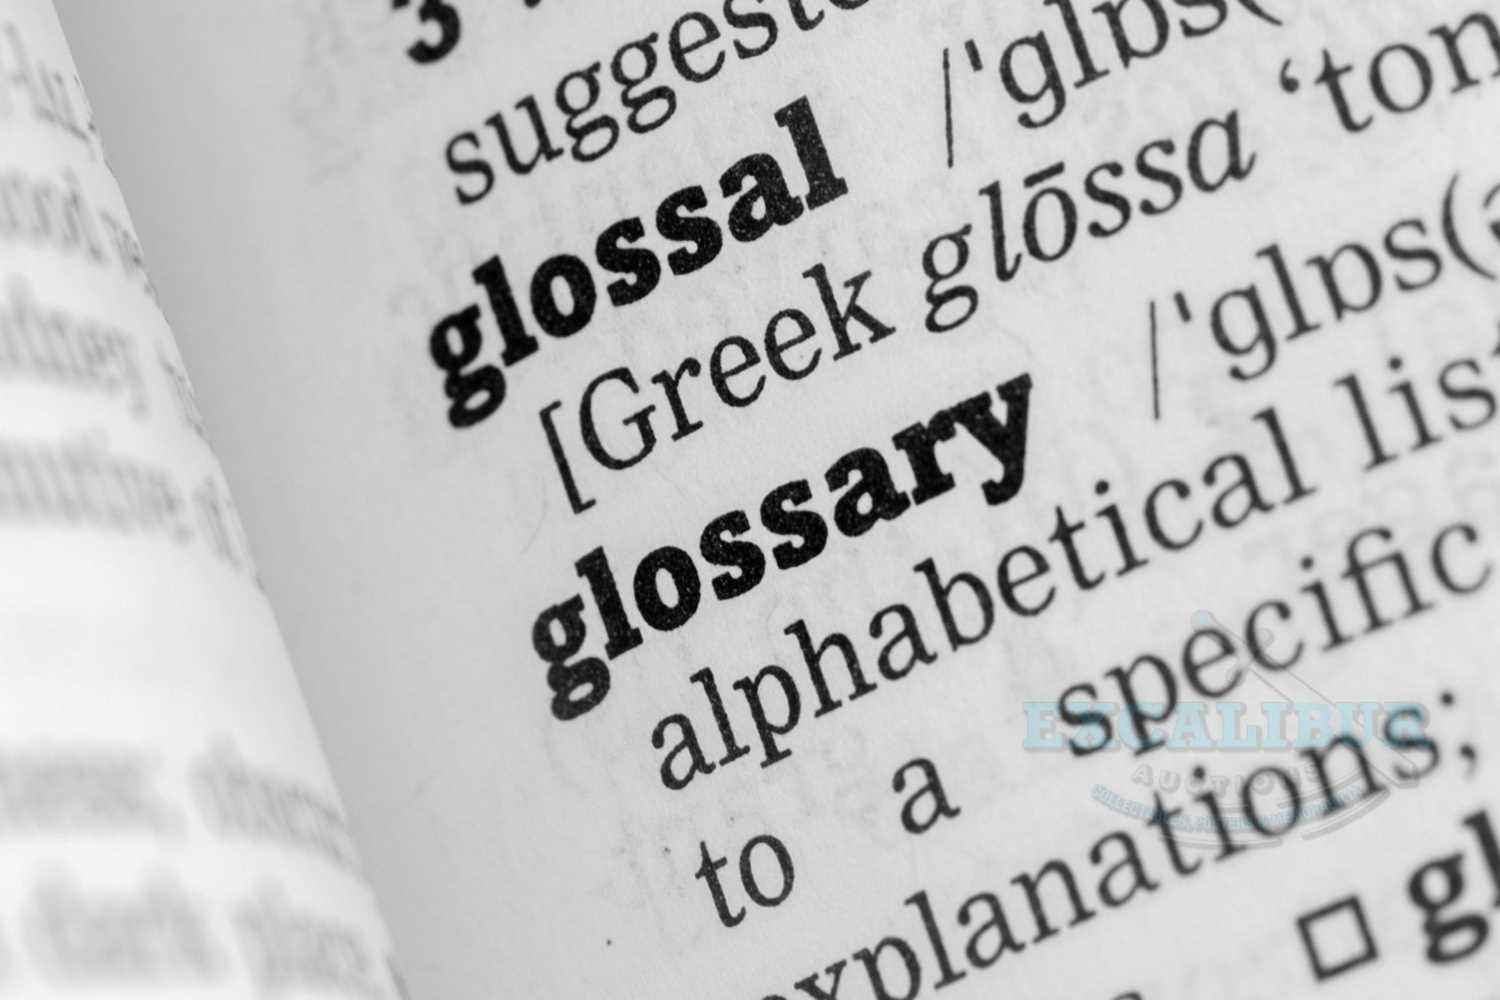 Lot 1 - Glossary of grading and terms used